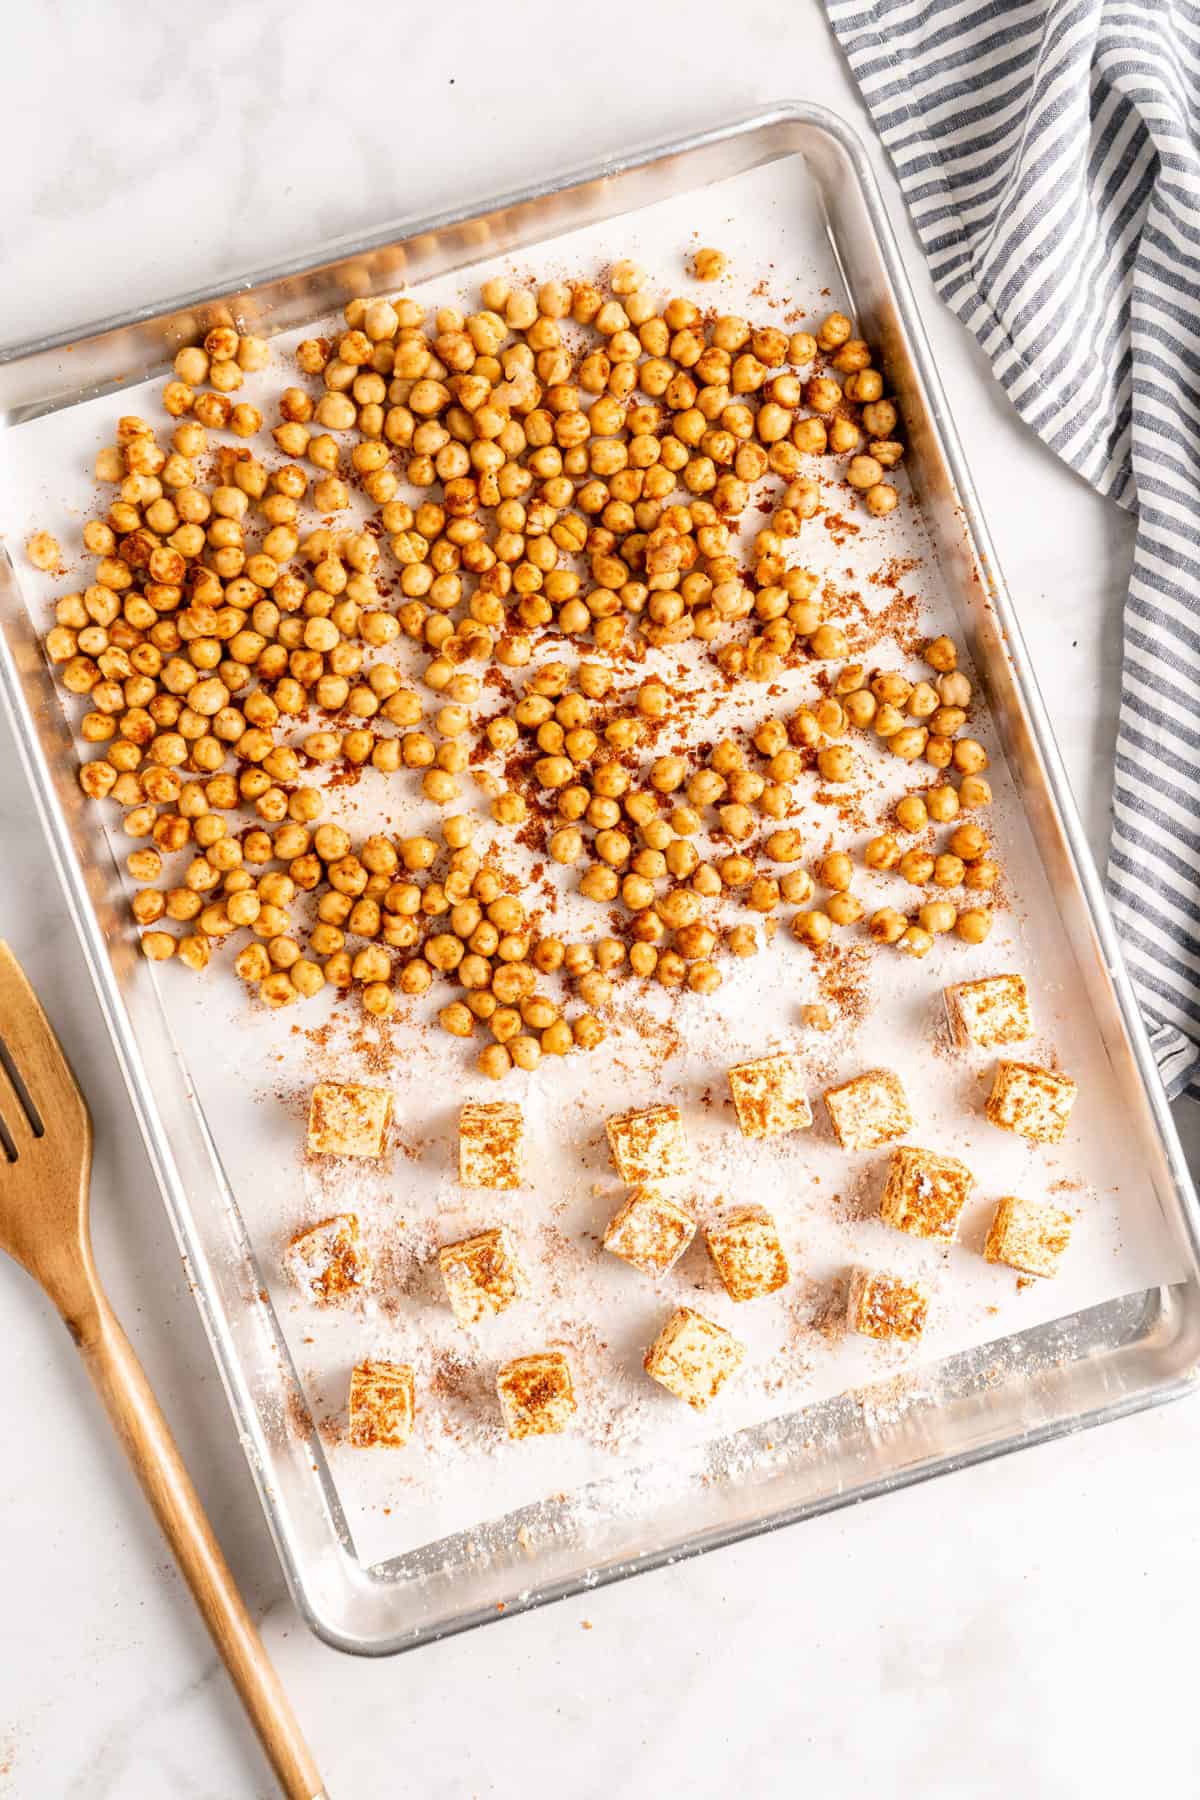 Overhead view of roasted chickpeas and tofu on parchment lined sheet pan